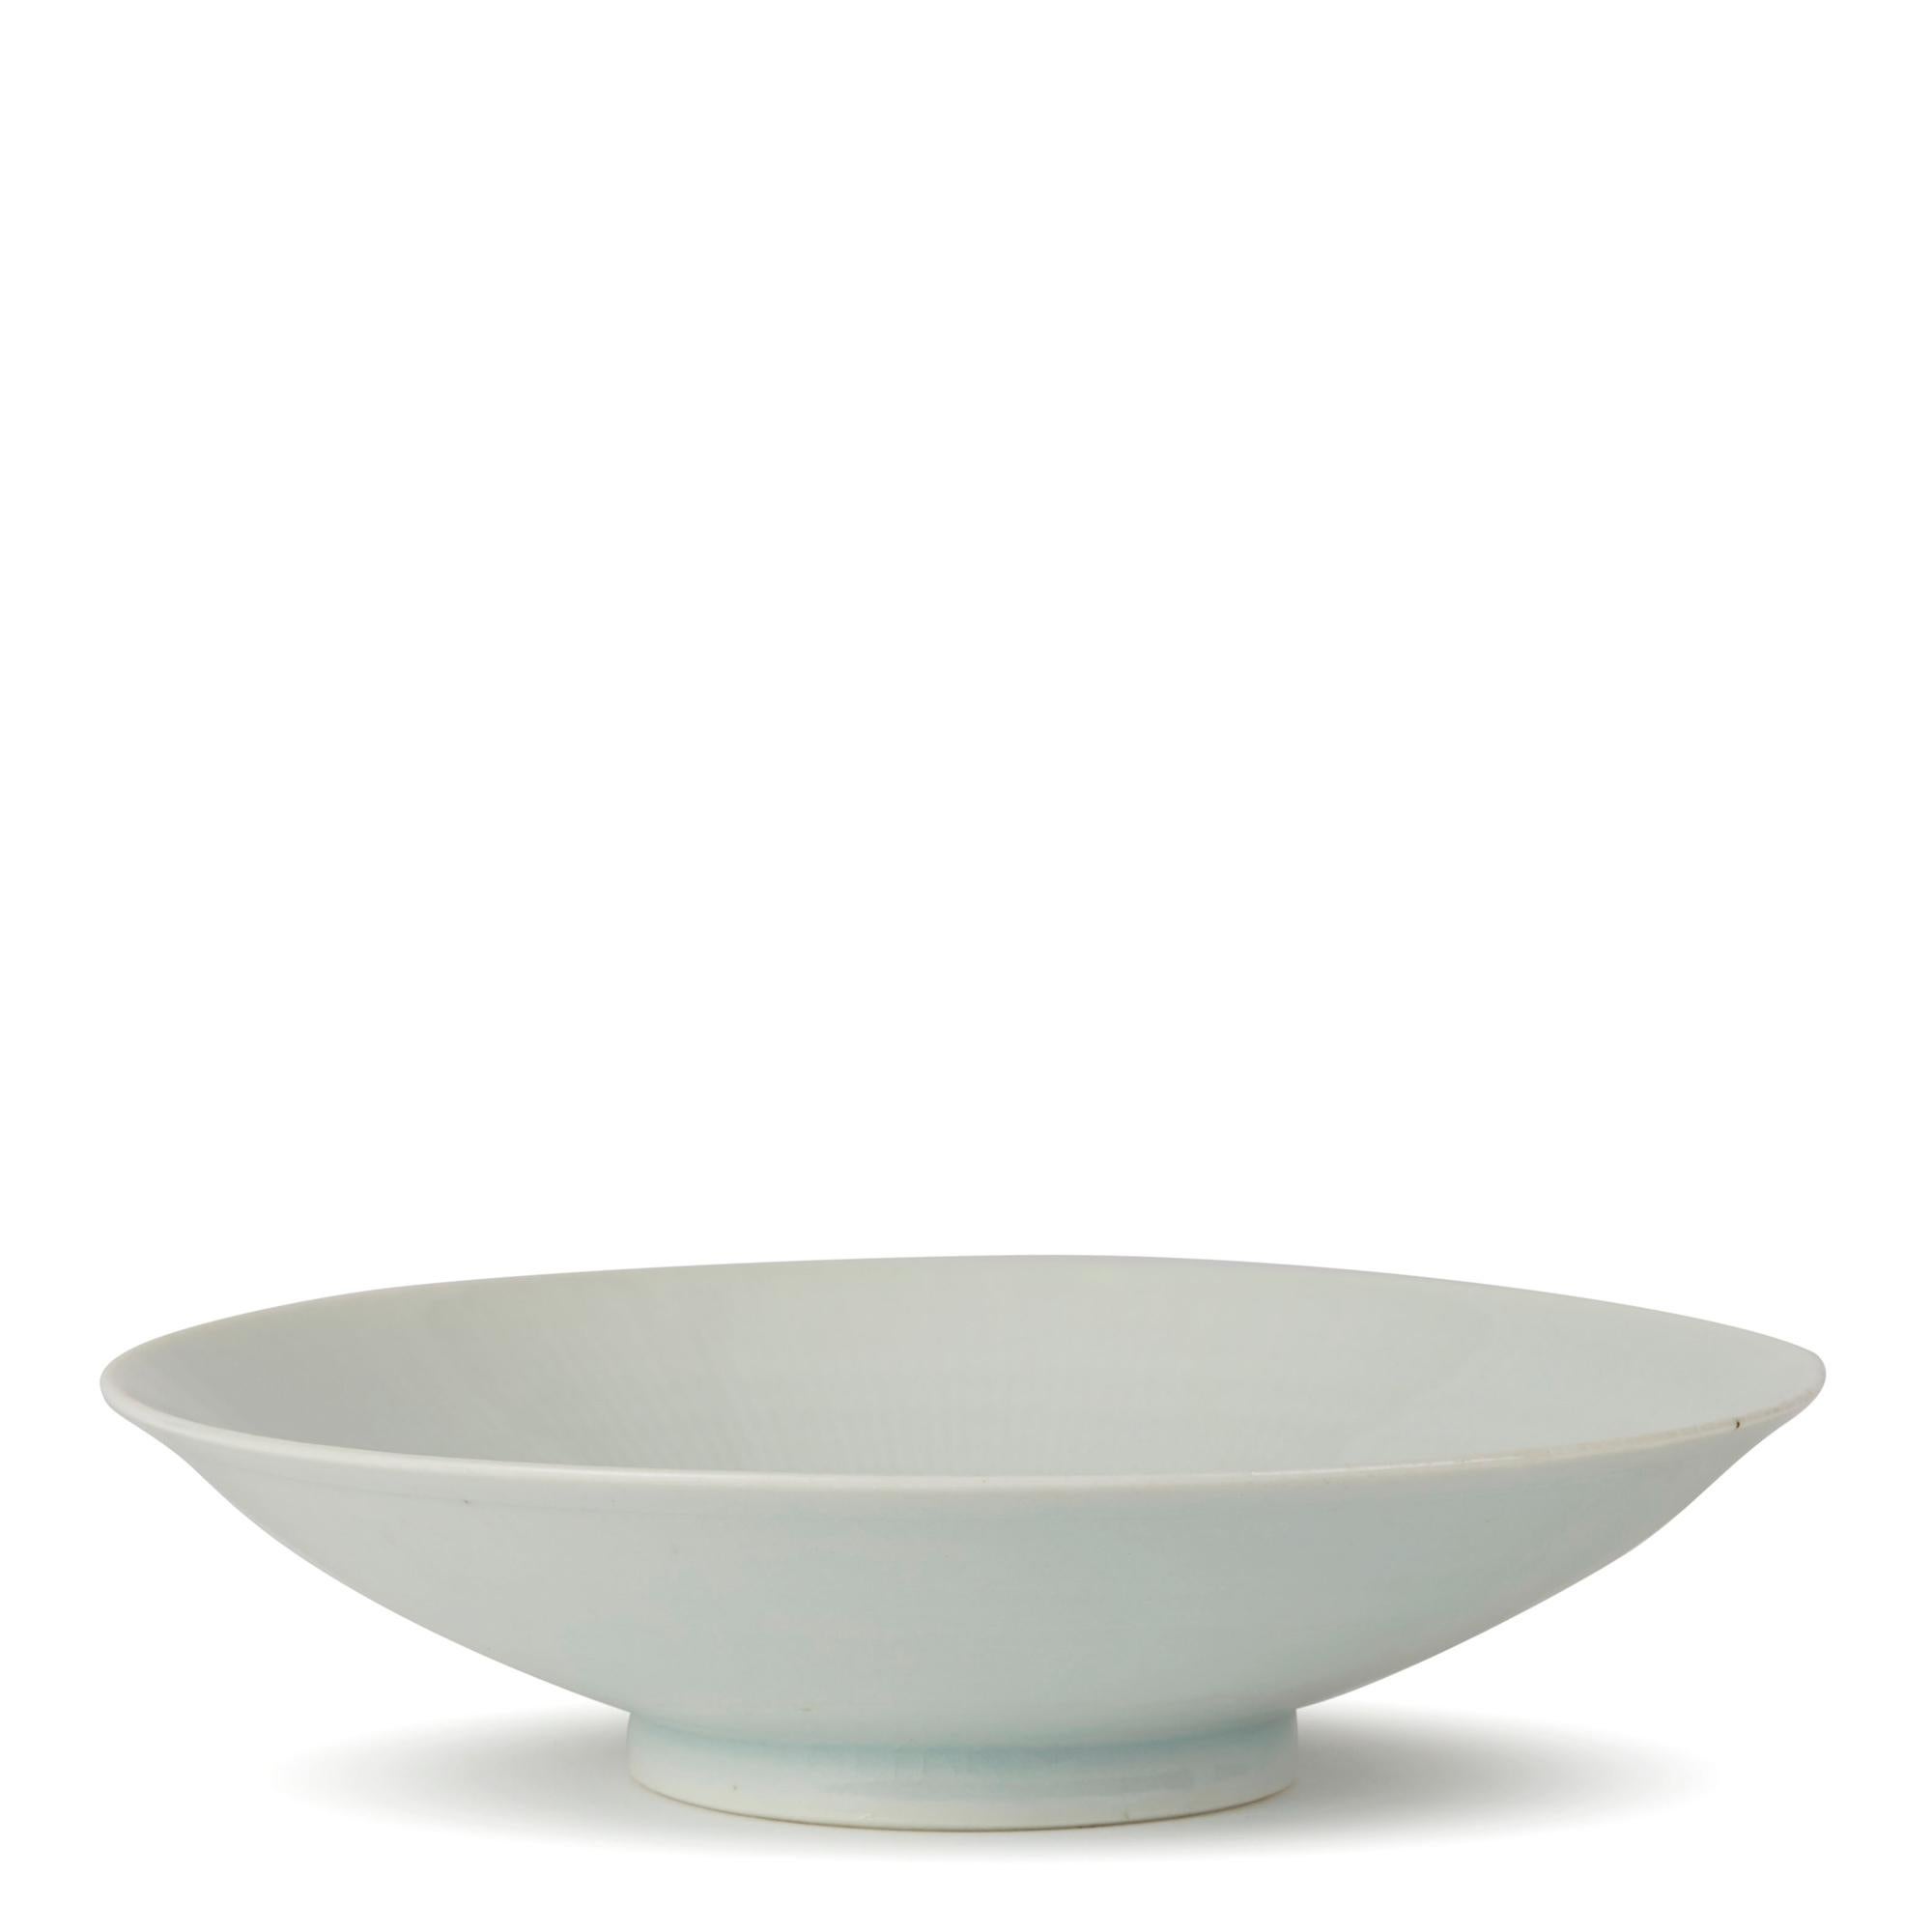 Late 20th Century William Mehornay Studio Pottery Porcelain Blue White Glazed Bowl, 1983 For Sale